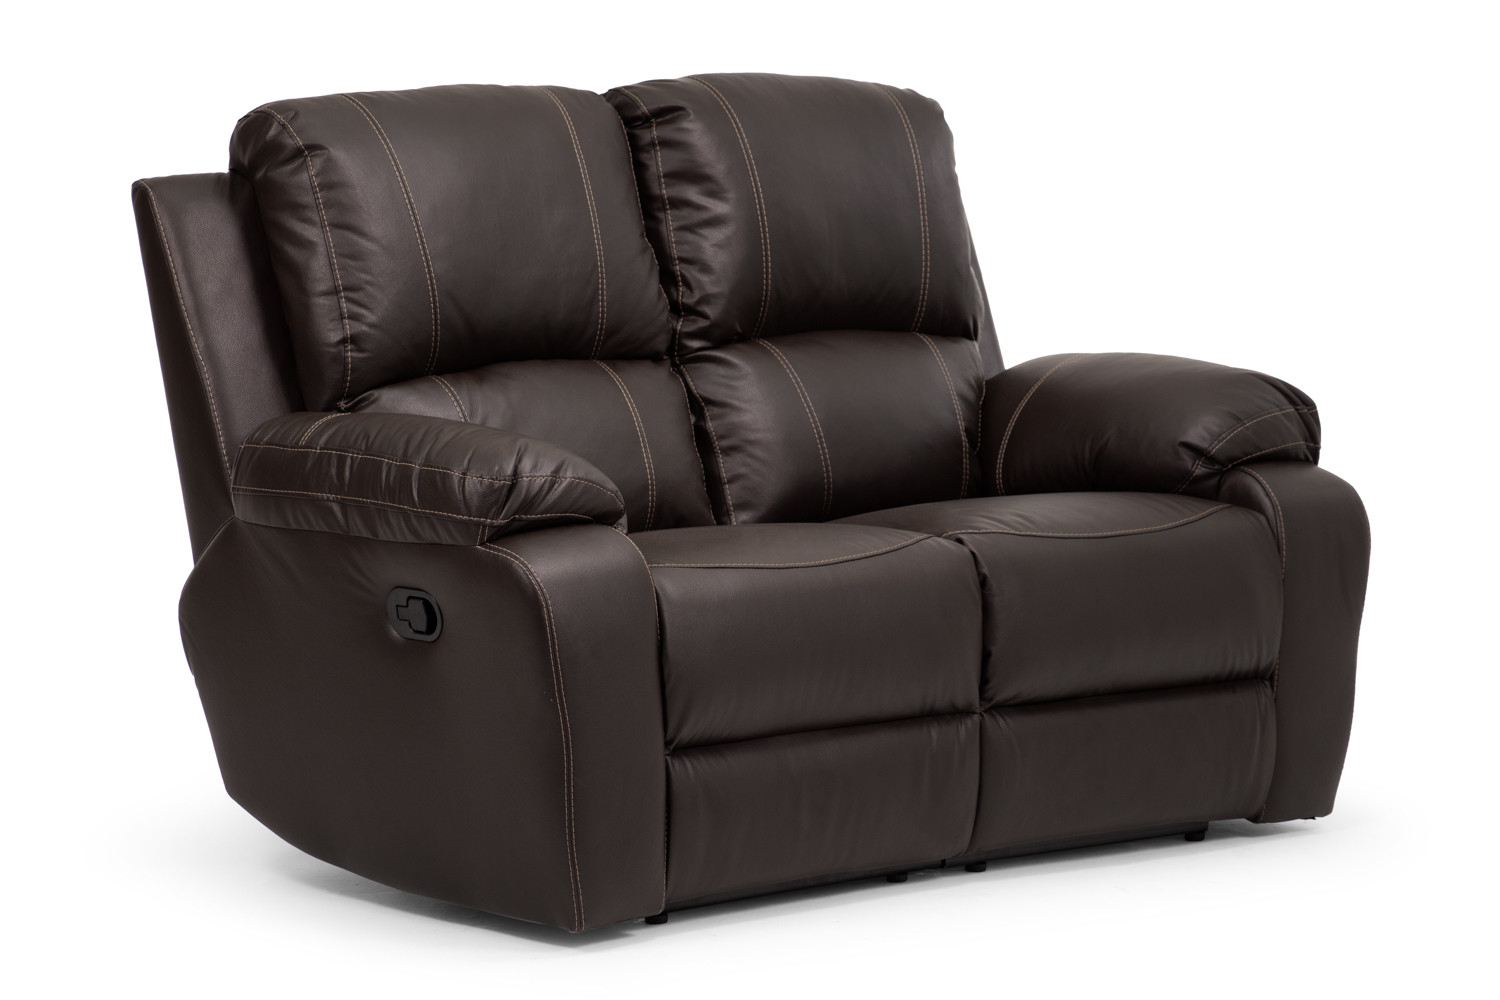 Charlton 2 Seater Leather Recliner - Brown Recliner Couches - 4